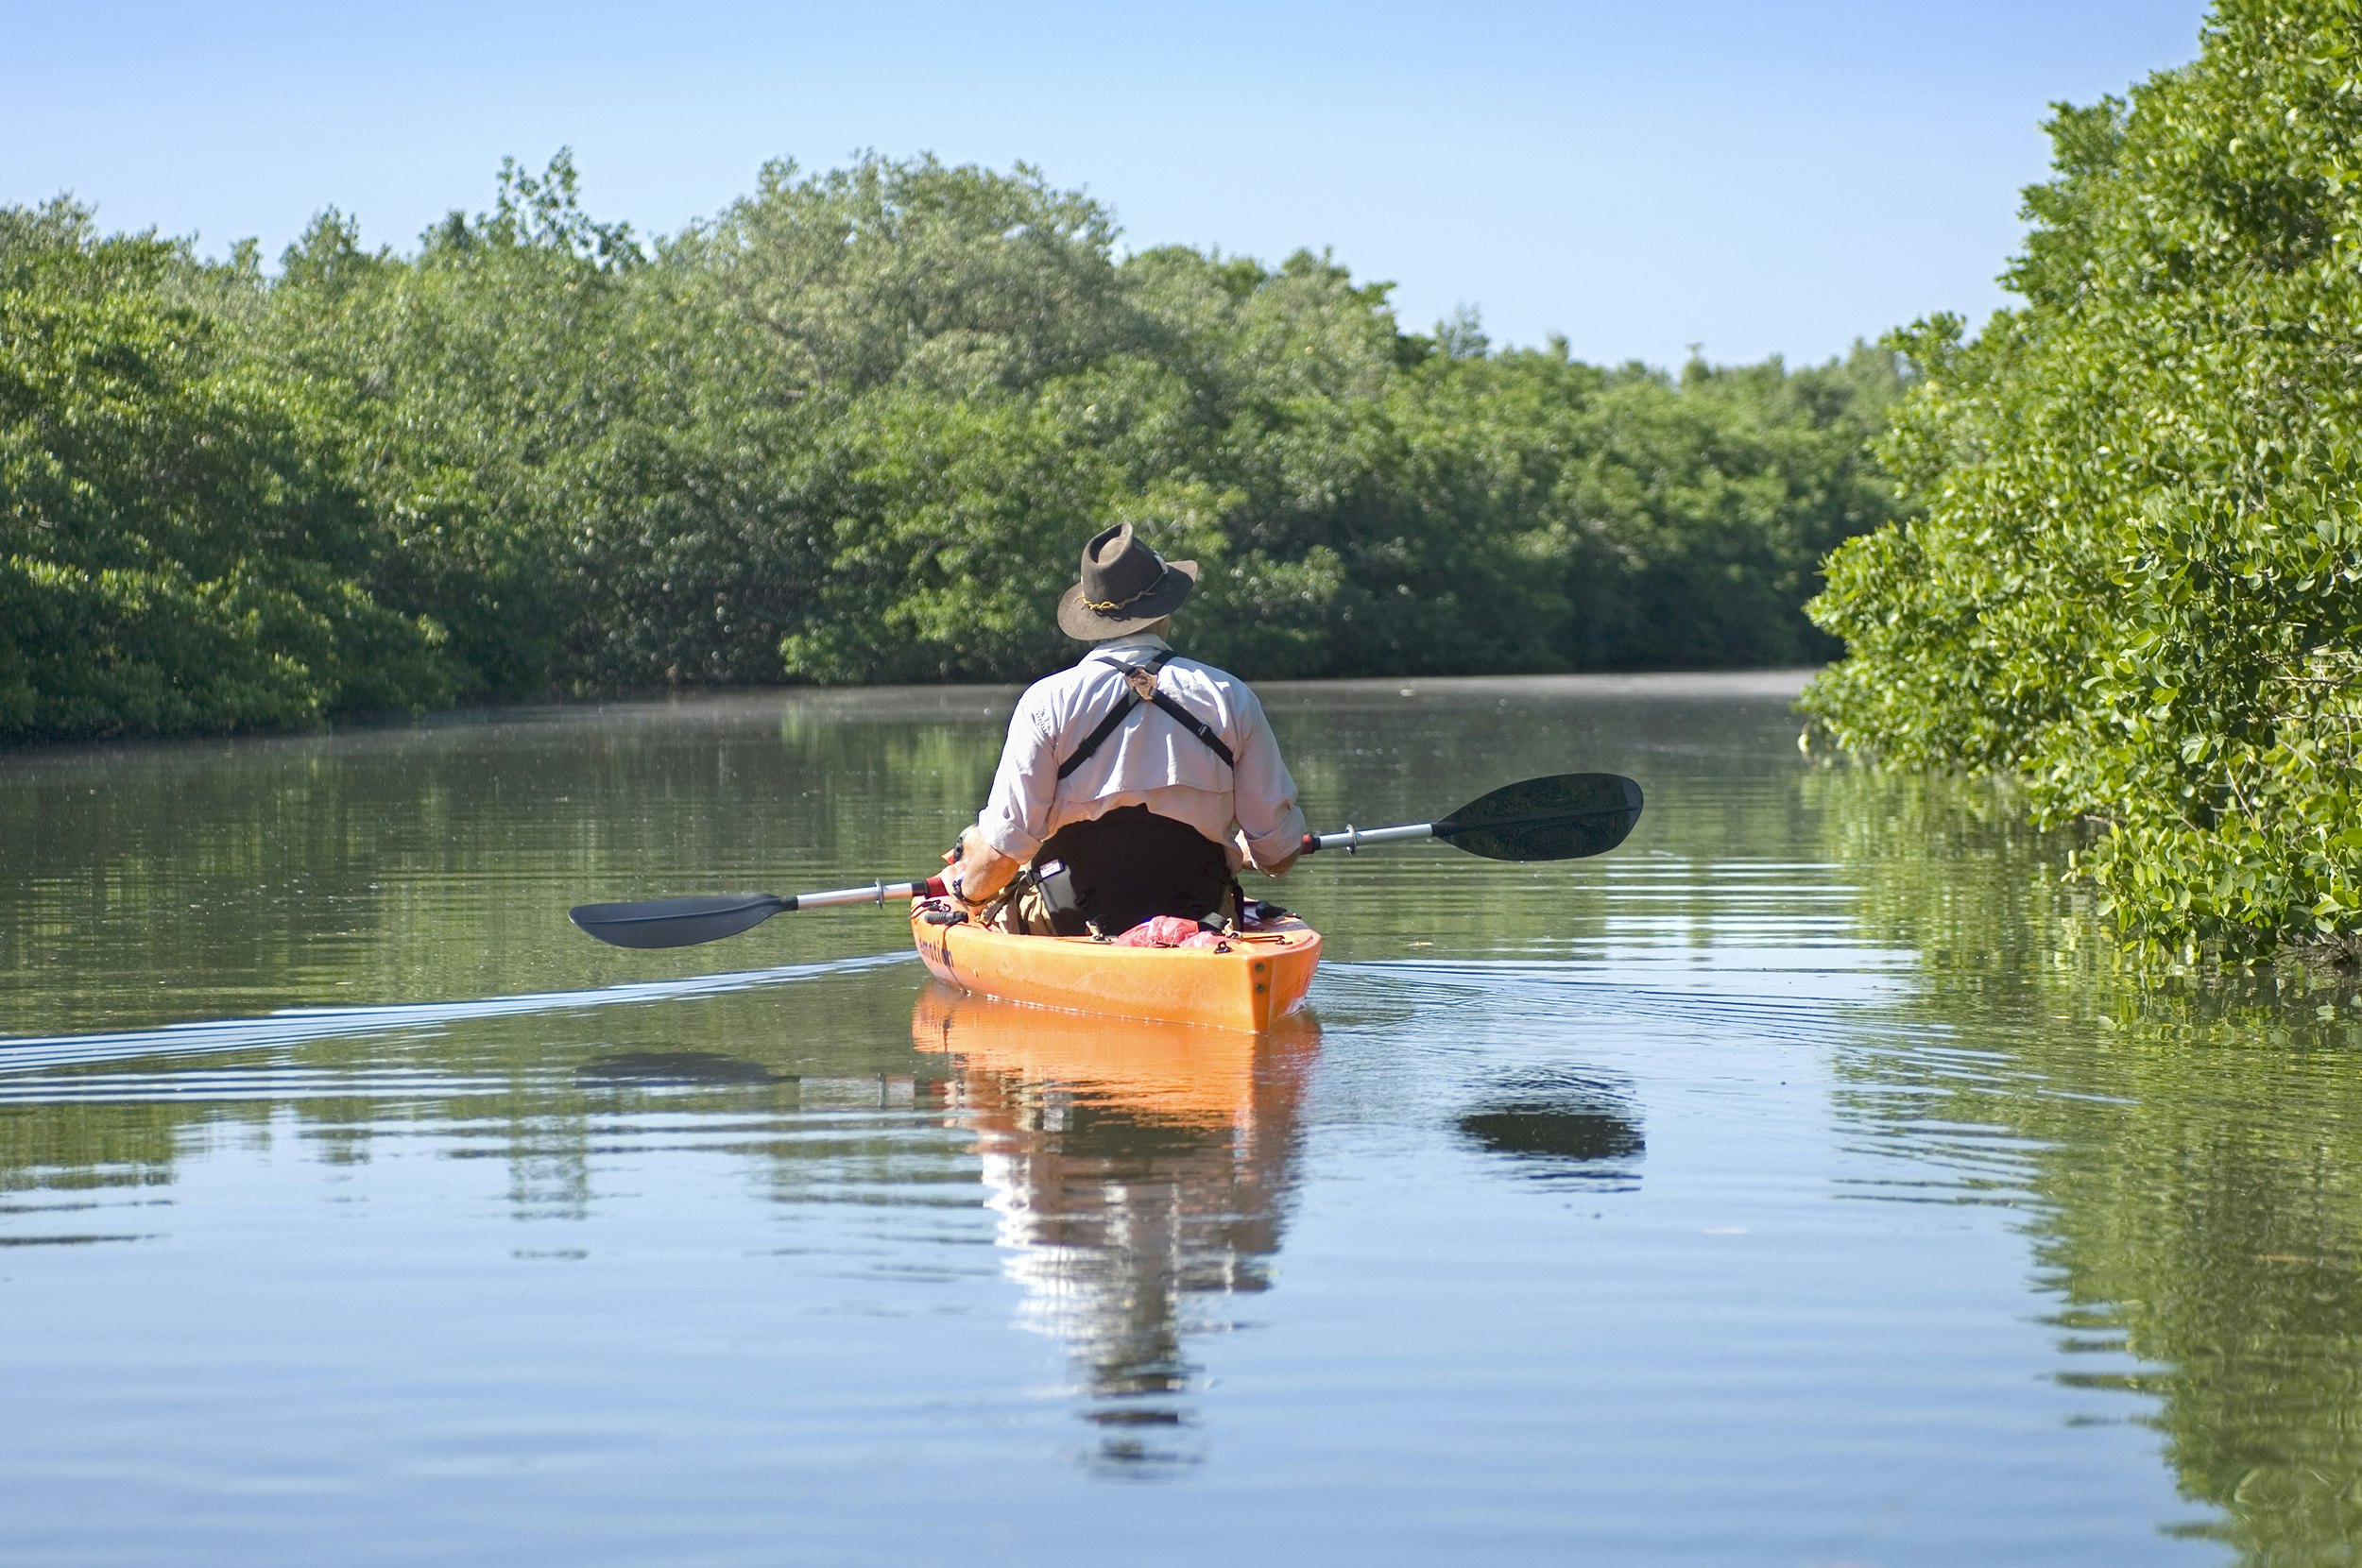 A man in an orange kayak paddling the still waters of Fort De Soto Park in Florida